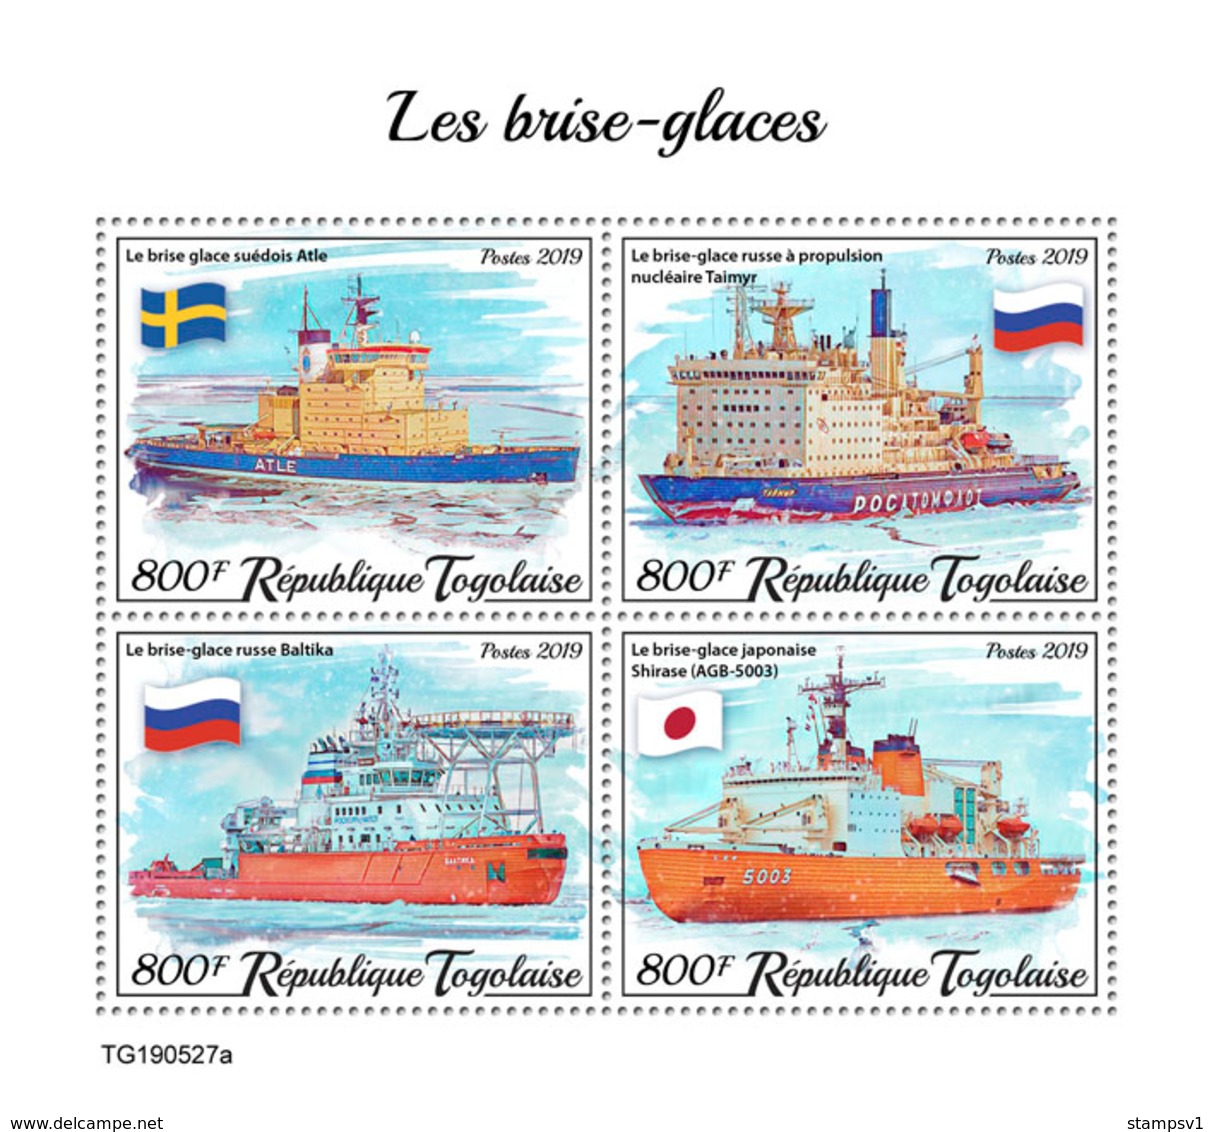 Togo. 2019 Icebreakers. (0527a)  OFFICIAL ISSUE - Bateaux